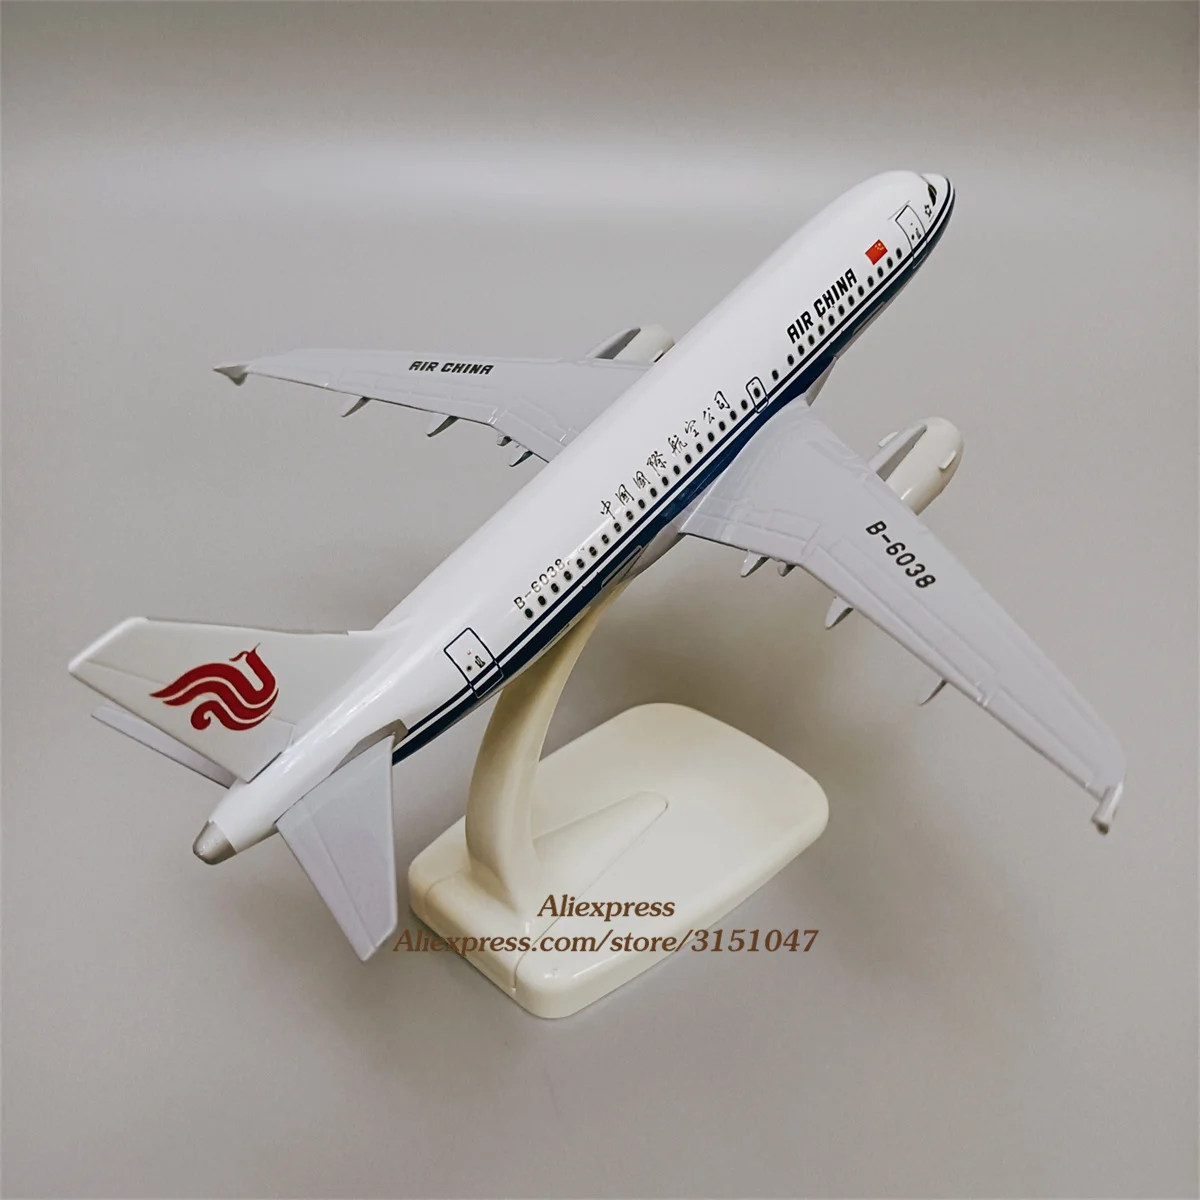 

NEW 18cm Model Airplane Air China Airlines Airbus 319 A319 B-6038 Airways Airlines Metal Alloy Plane Model Diecast Aircraft TOY